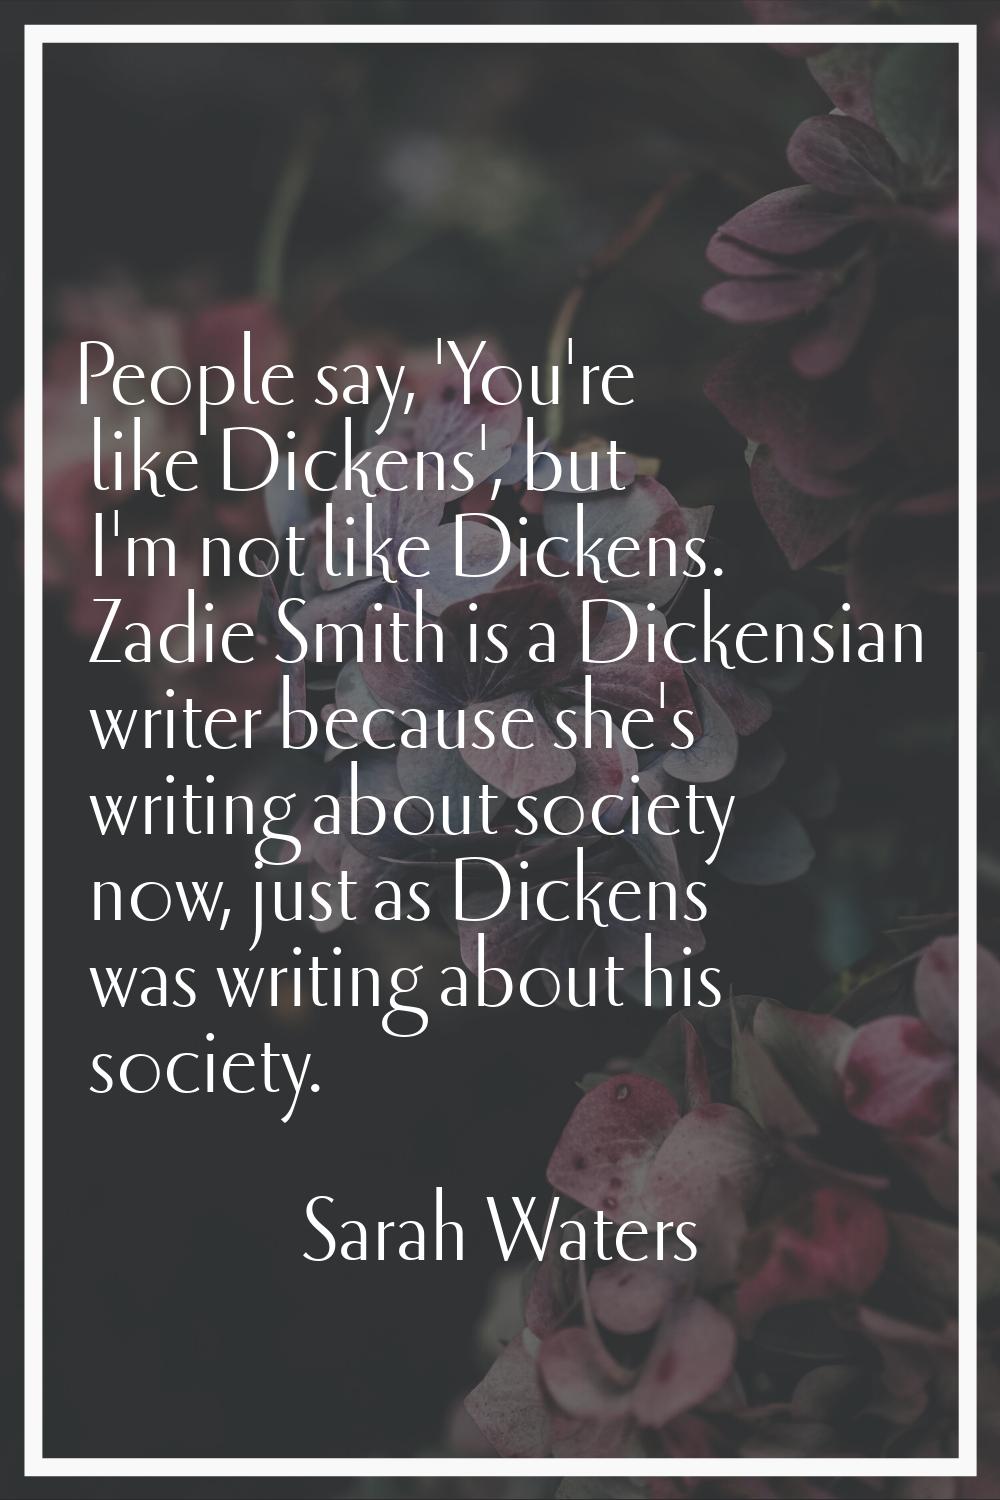 People say, 'You're like Dickens', but I'm not like Dickens. Zadie Smith is a Dickensian writer bec